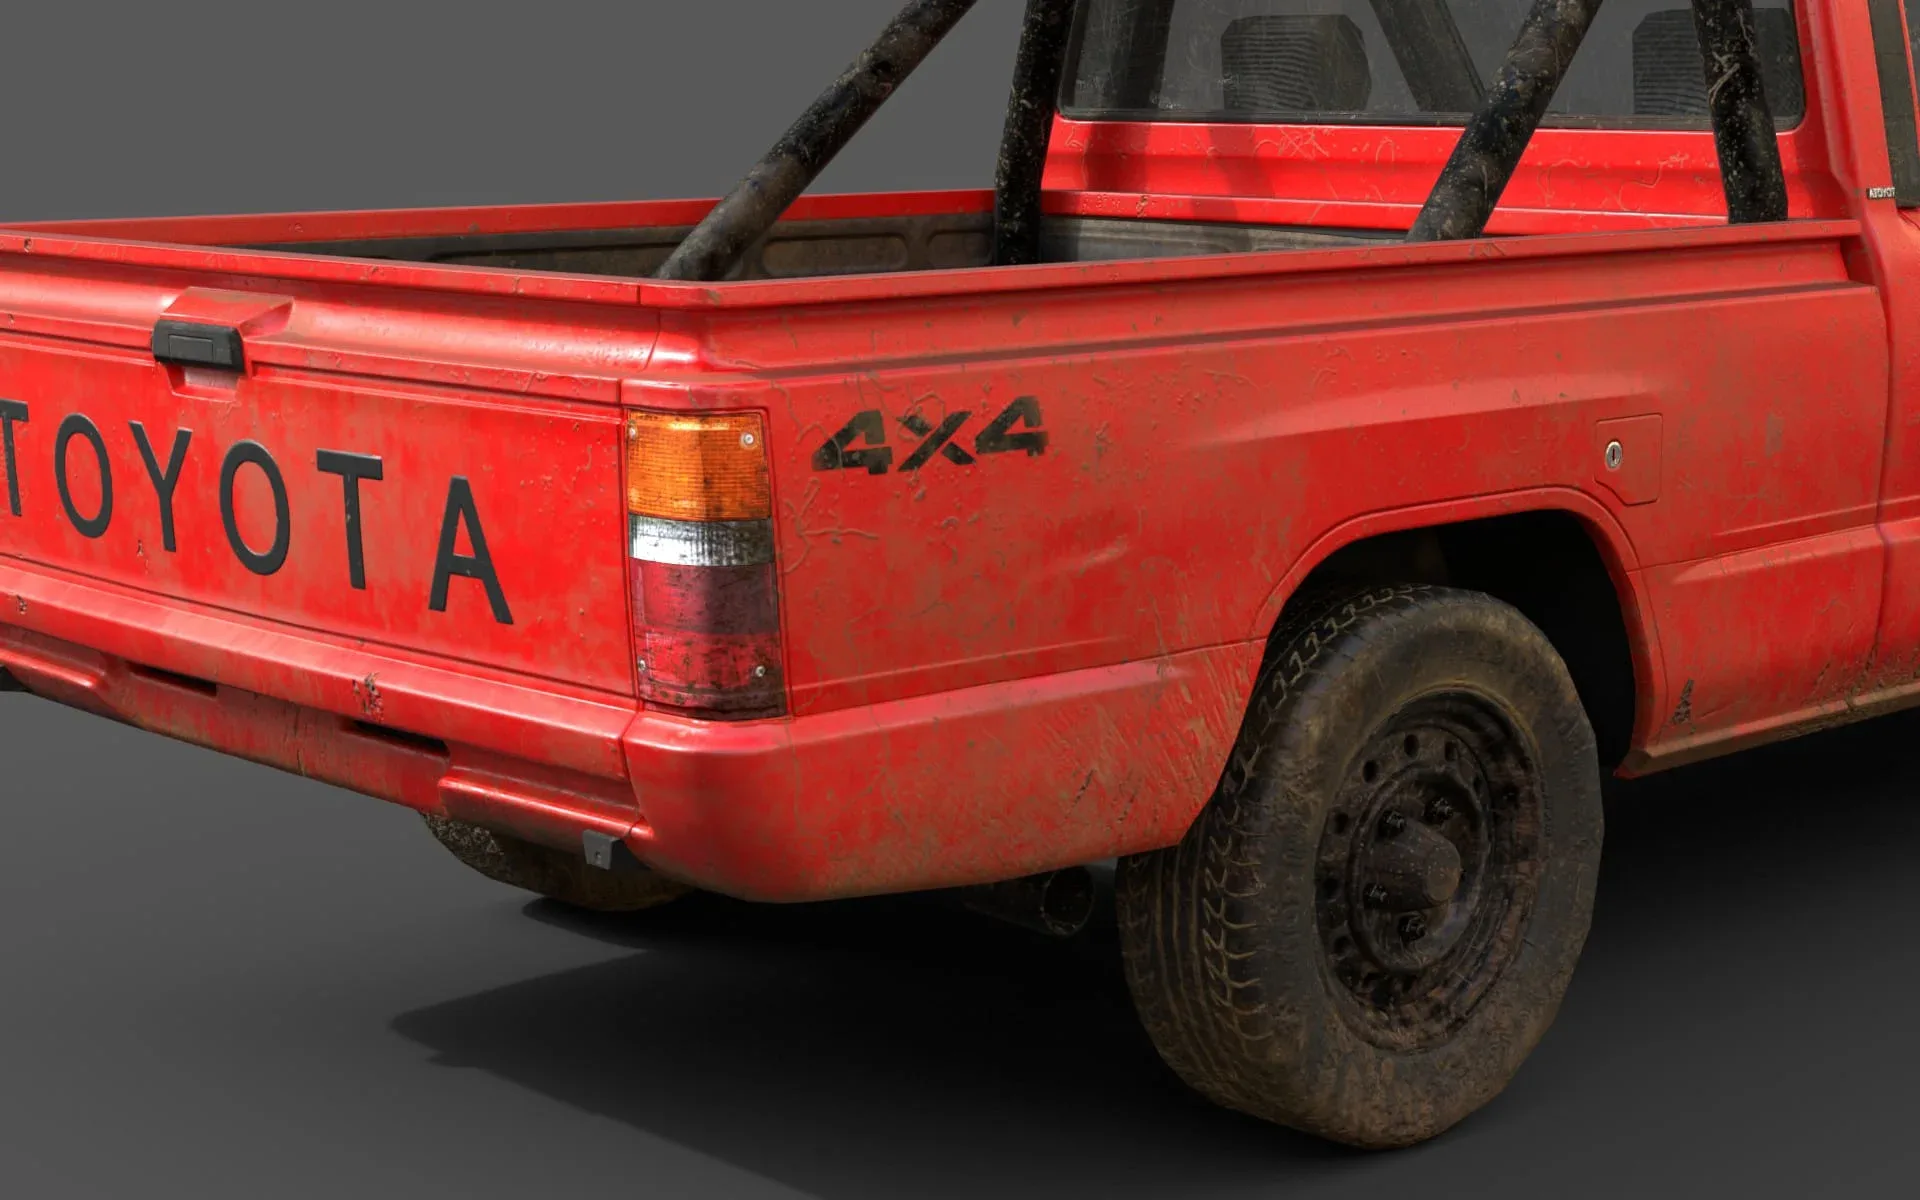 Toyota Hilux 1983 Lowpoly Model